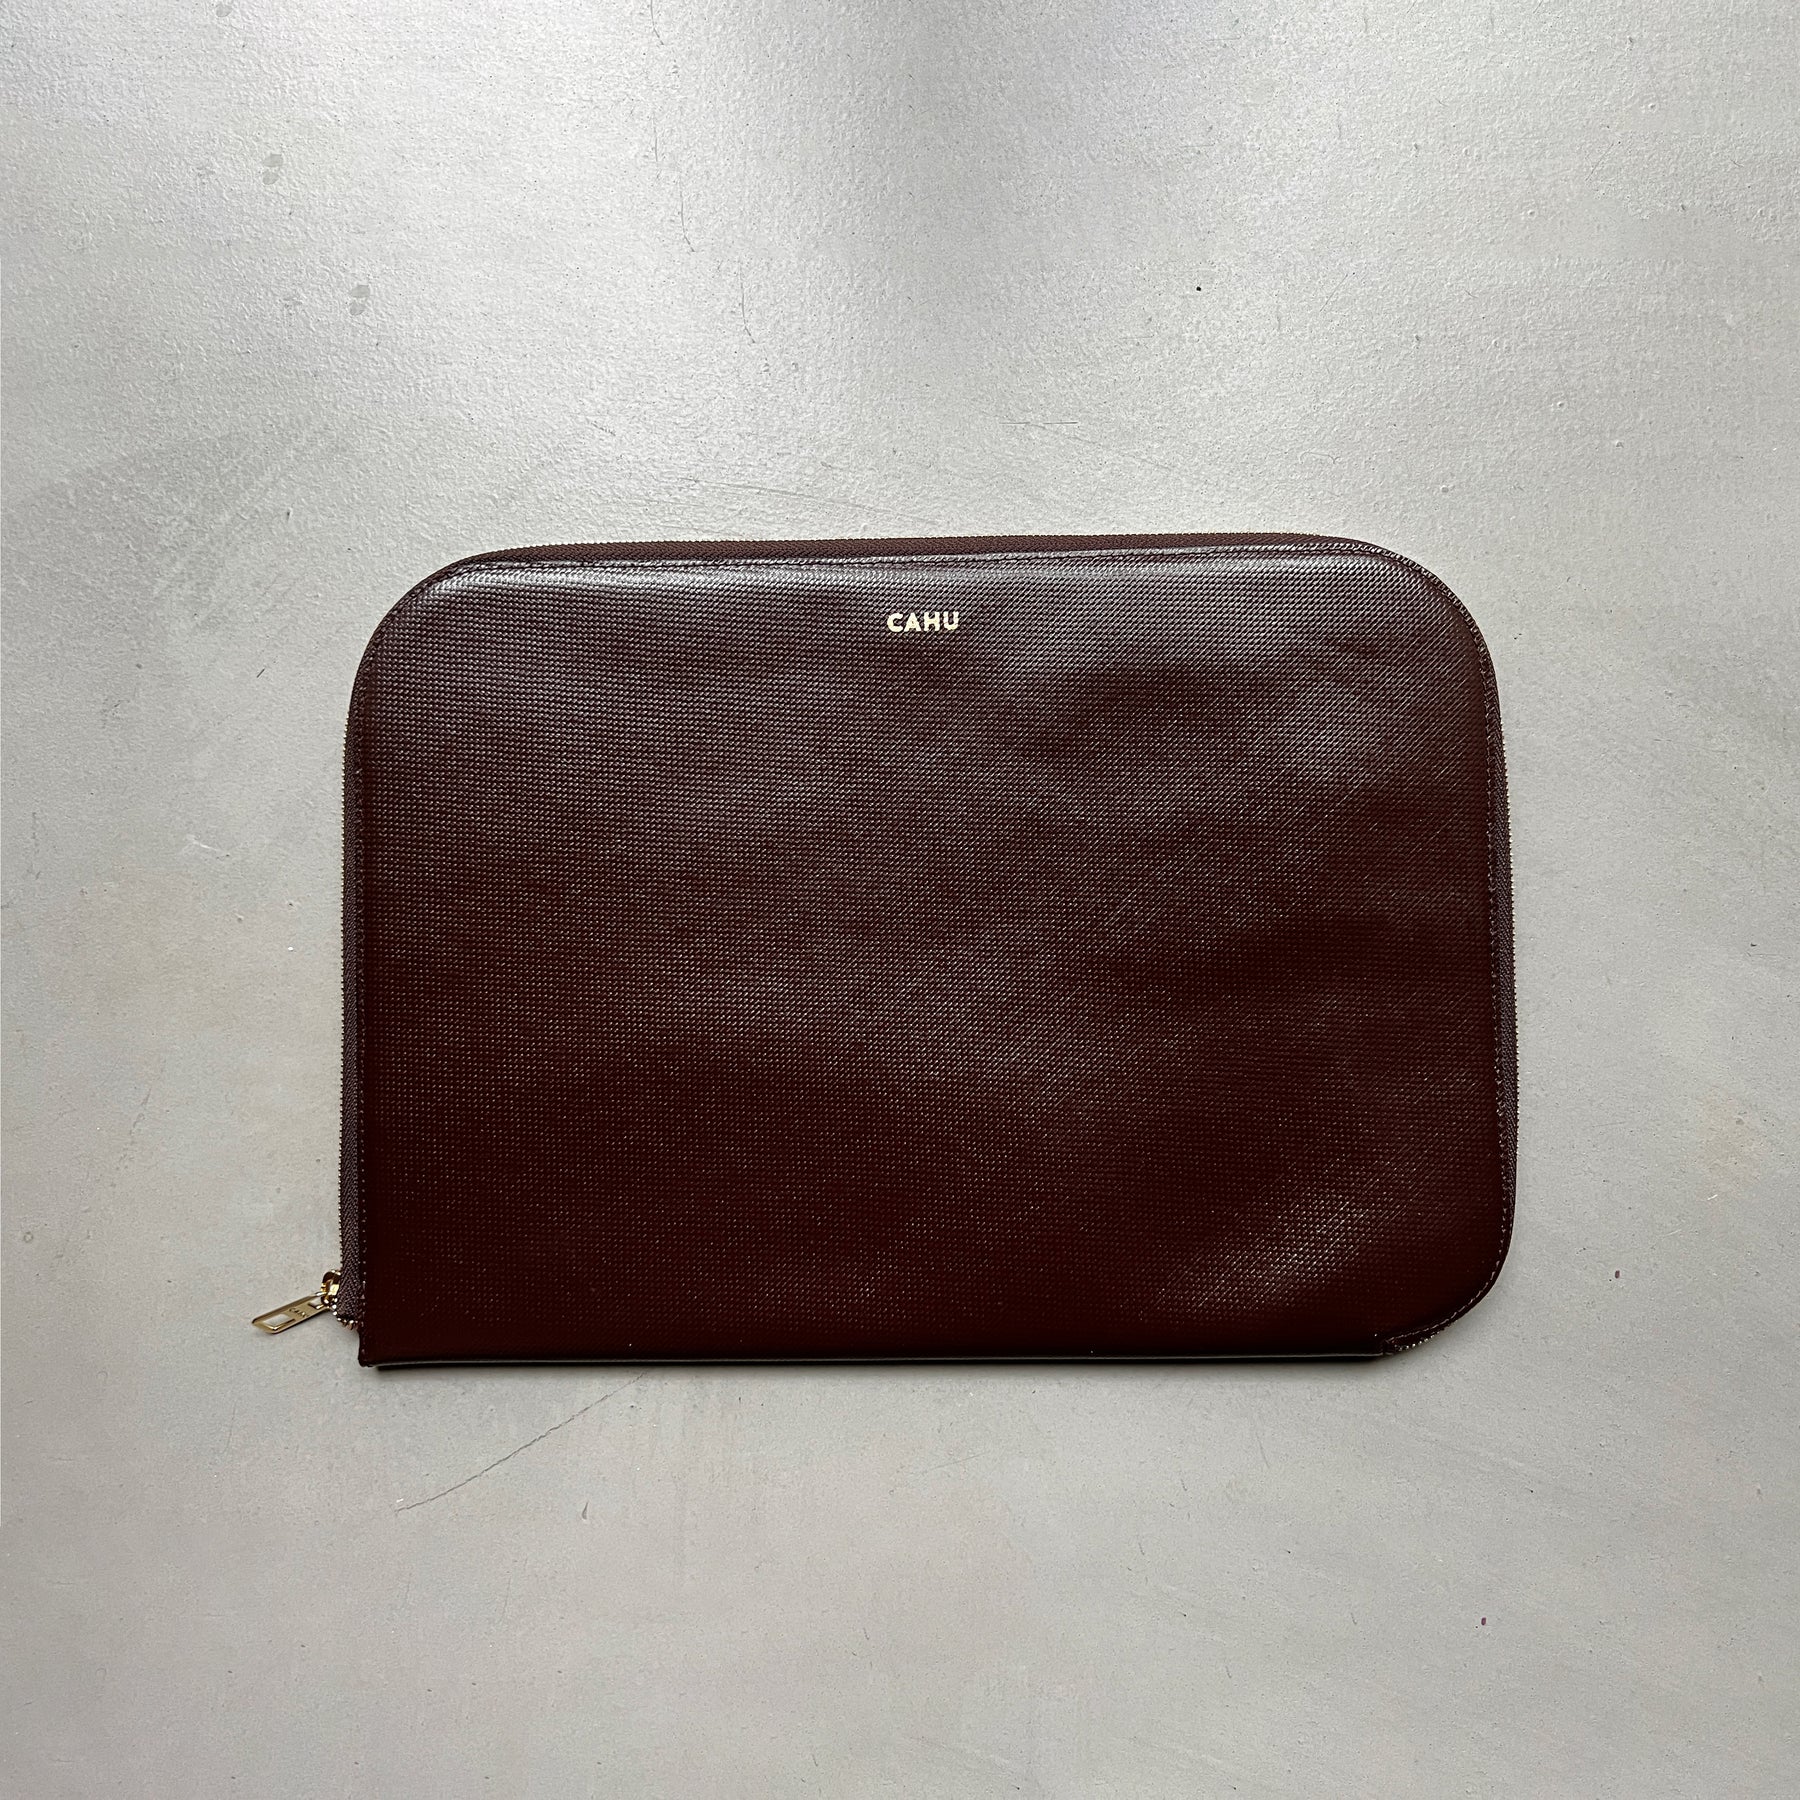 THE CLAUDE BROWN LAPTOP SLEEVE